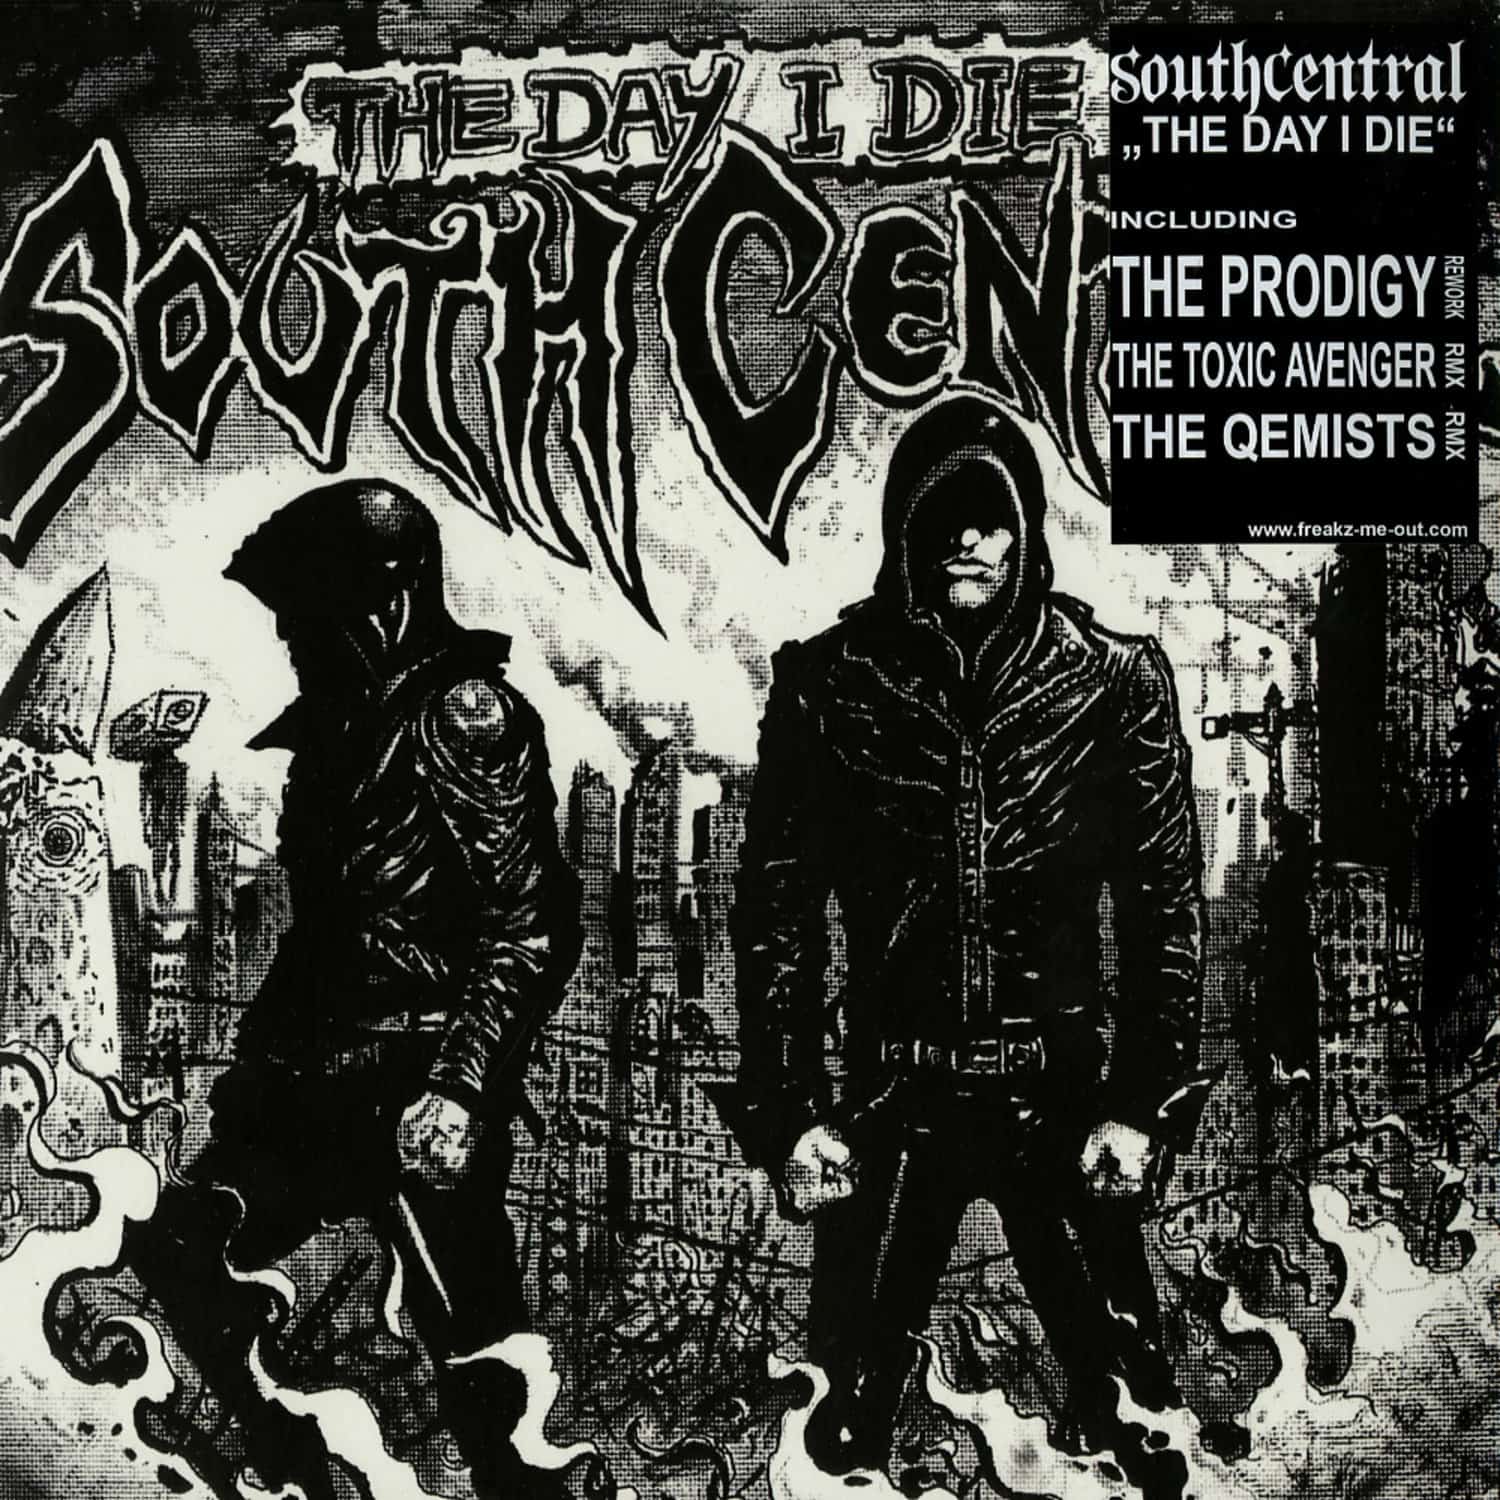 South Central - THE DAY I DIE - THE PRODIGY REMIX